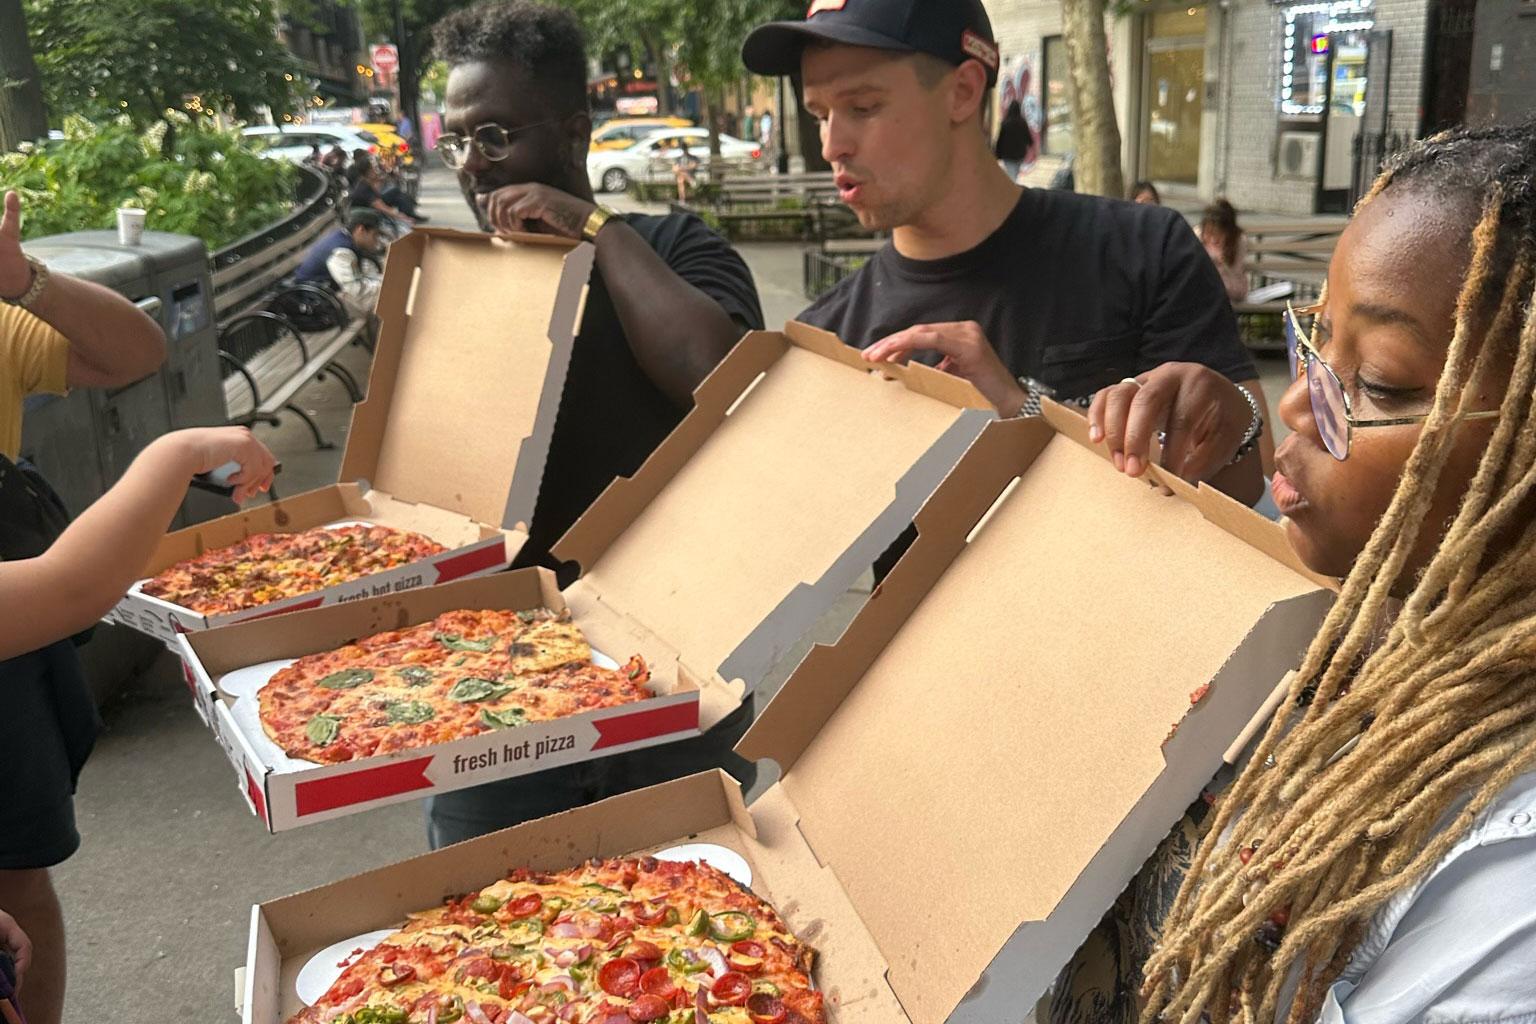 Three people stand on a sidewalk, with pizza boxes open, revealing pizzas inside.